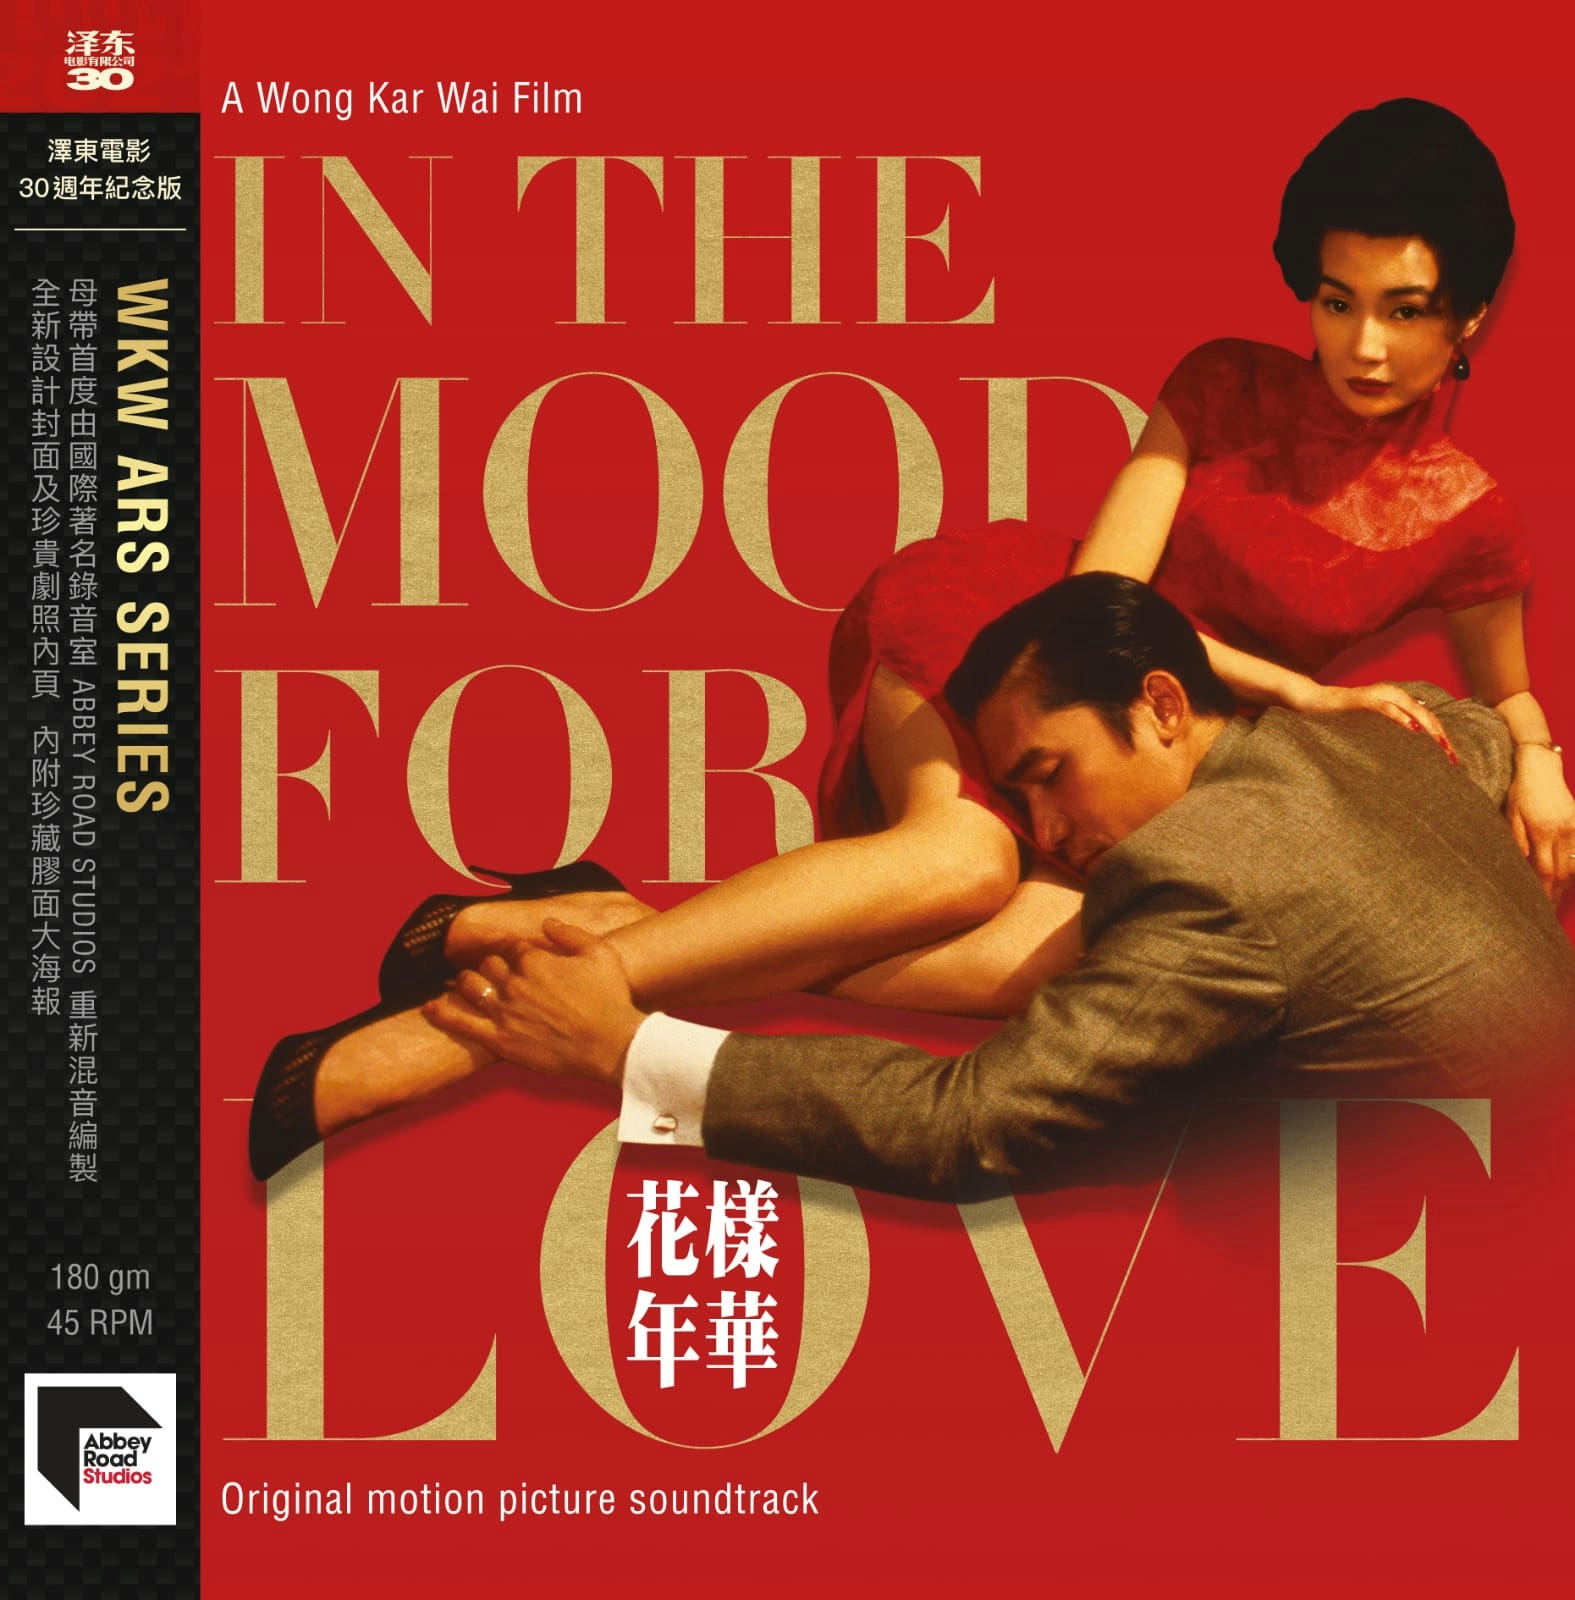 Album artwork for Album artwork for In The Mood For Love by Original Soundtrack by In The Mood For Love - Original Soundtrack